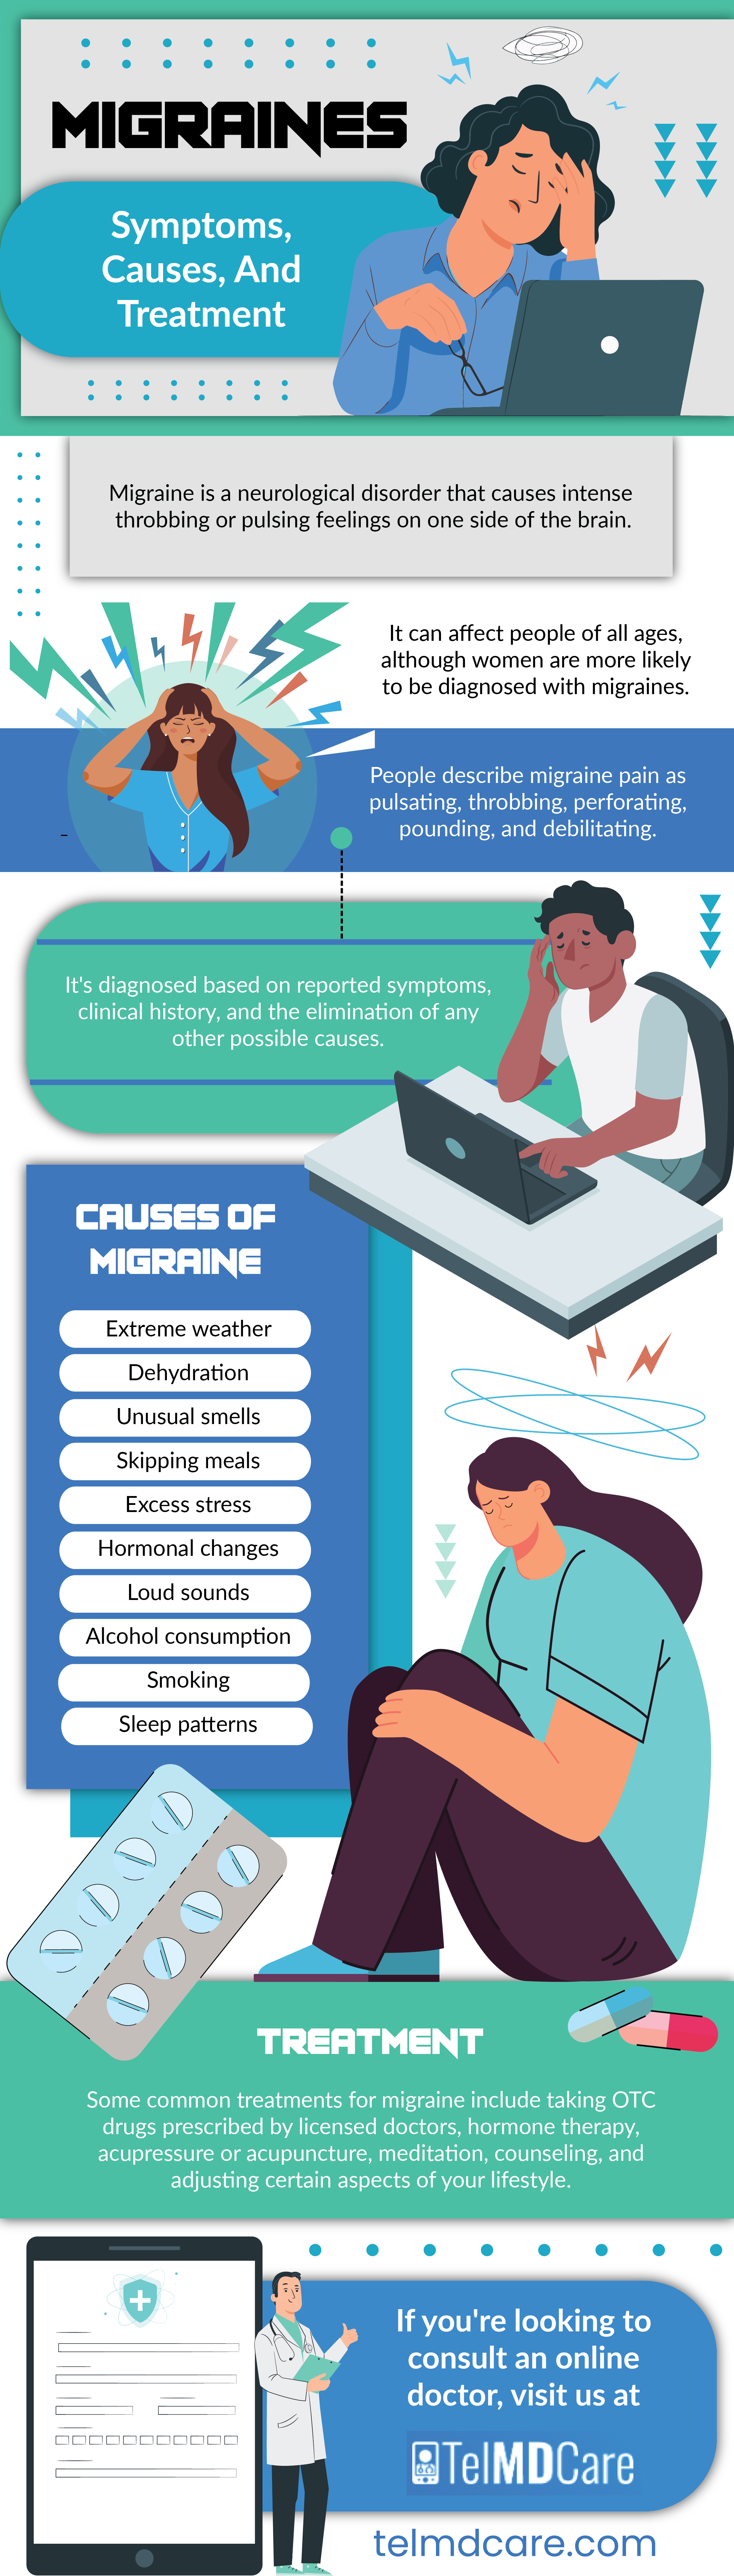 Migranes symptoms causes and treatment